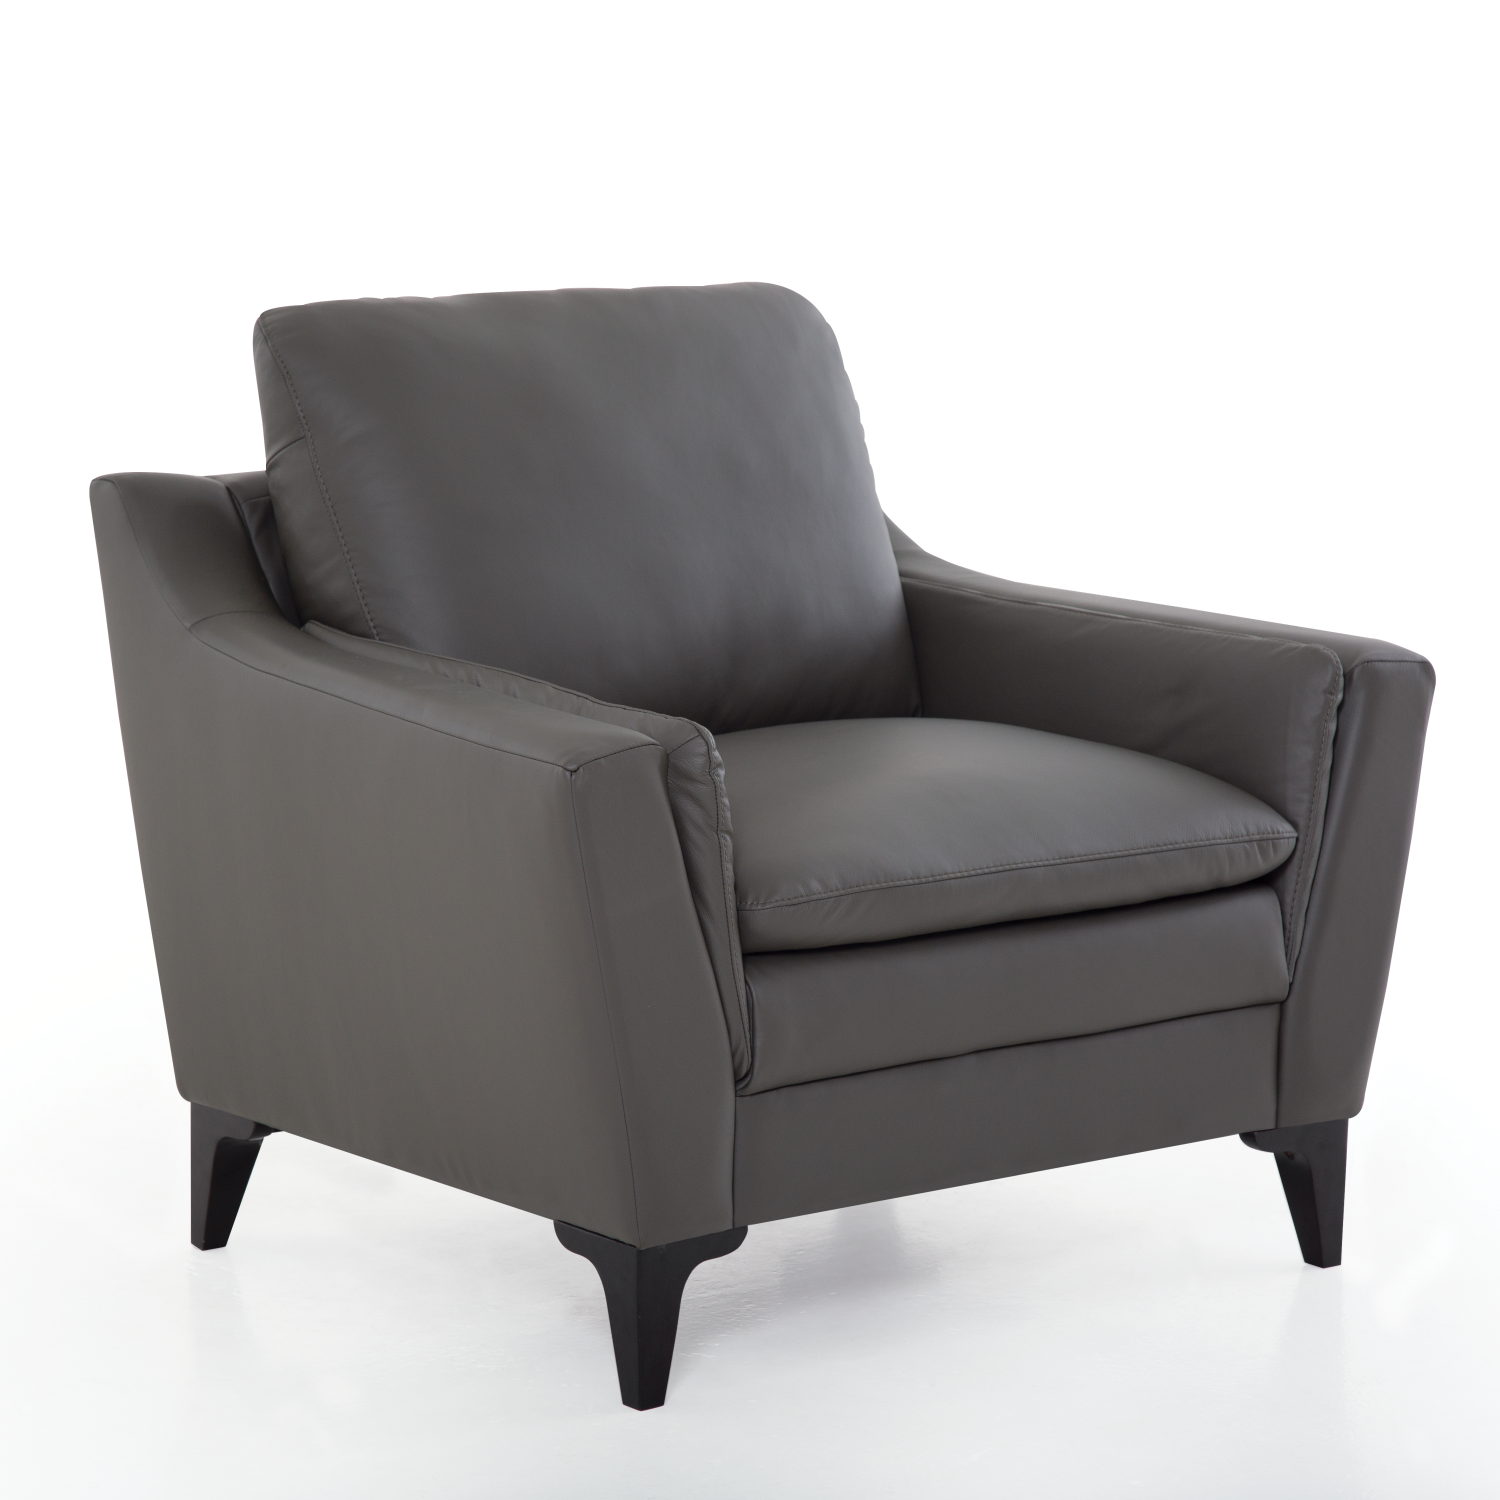 Palliser Balmoral chair front angled view